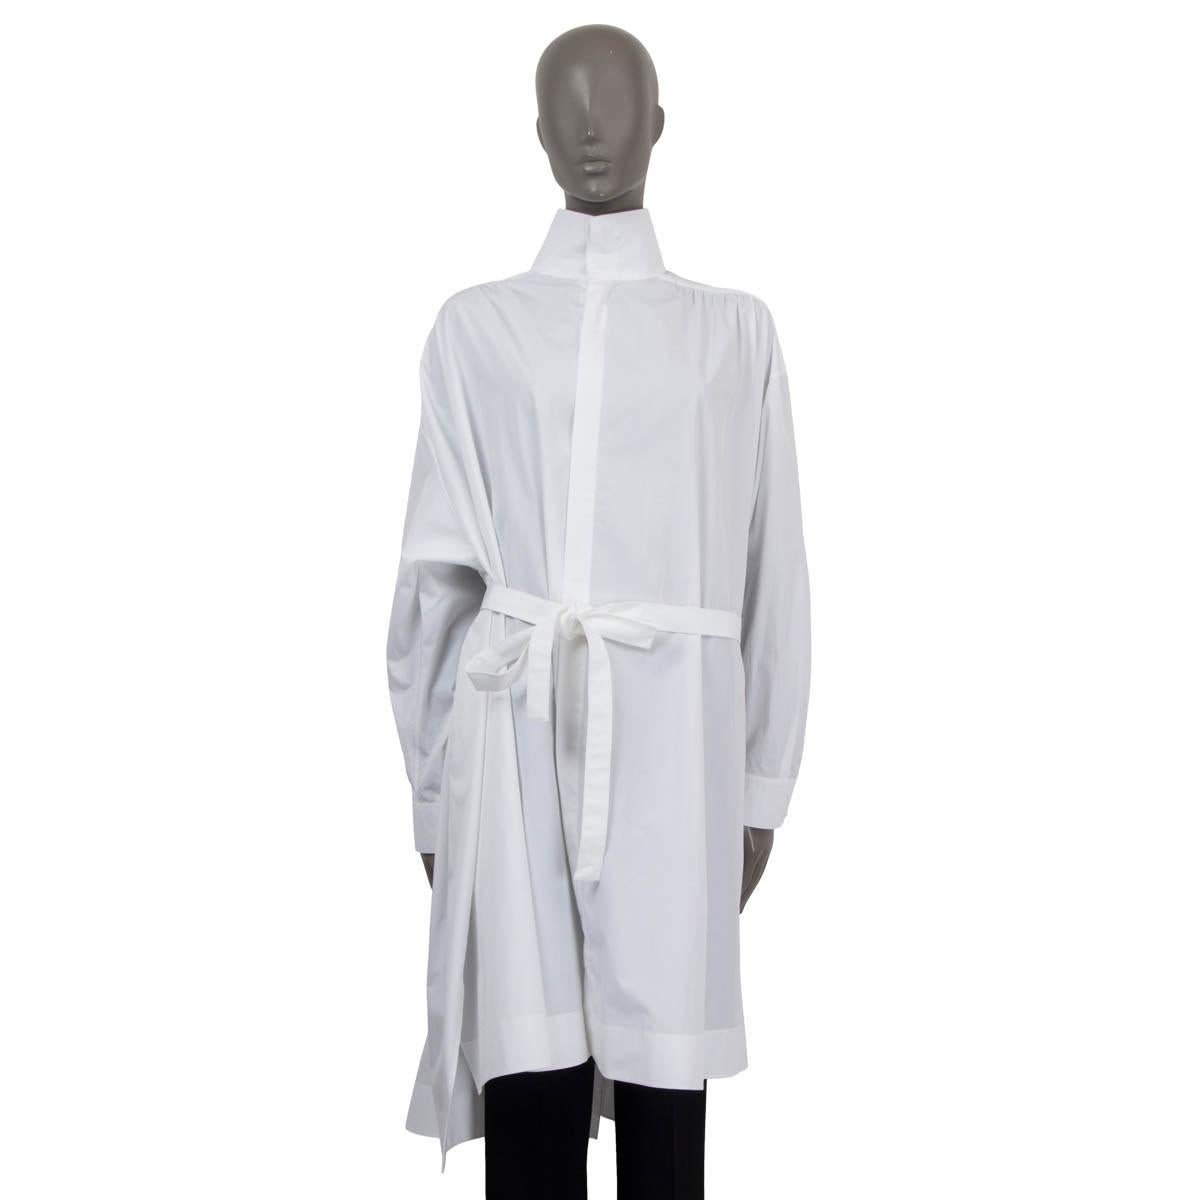 100% authentic Alaia oversized poplin blouse in white cotton (100%). Features a full back slit, a detachable belt and a high neck. Has long sleeves, drop shoulders and buttoned cuffs. Opens with buttons on the front. Unlined. Has been worn and is in